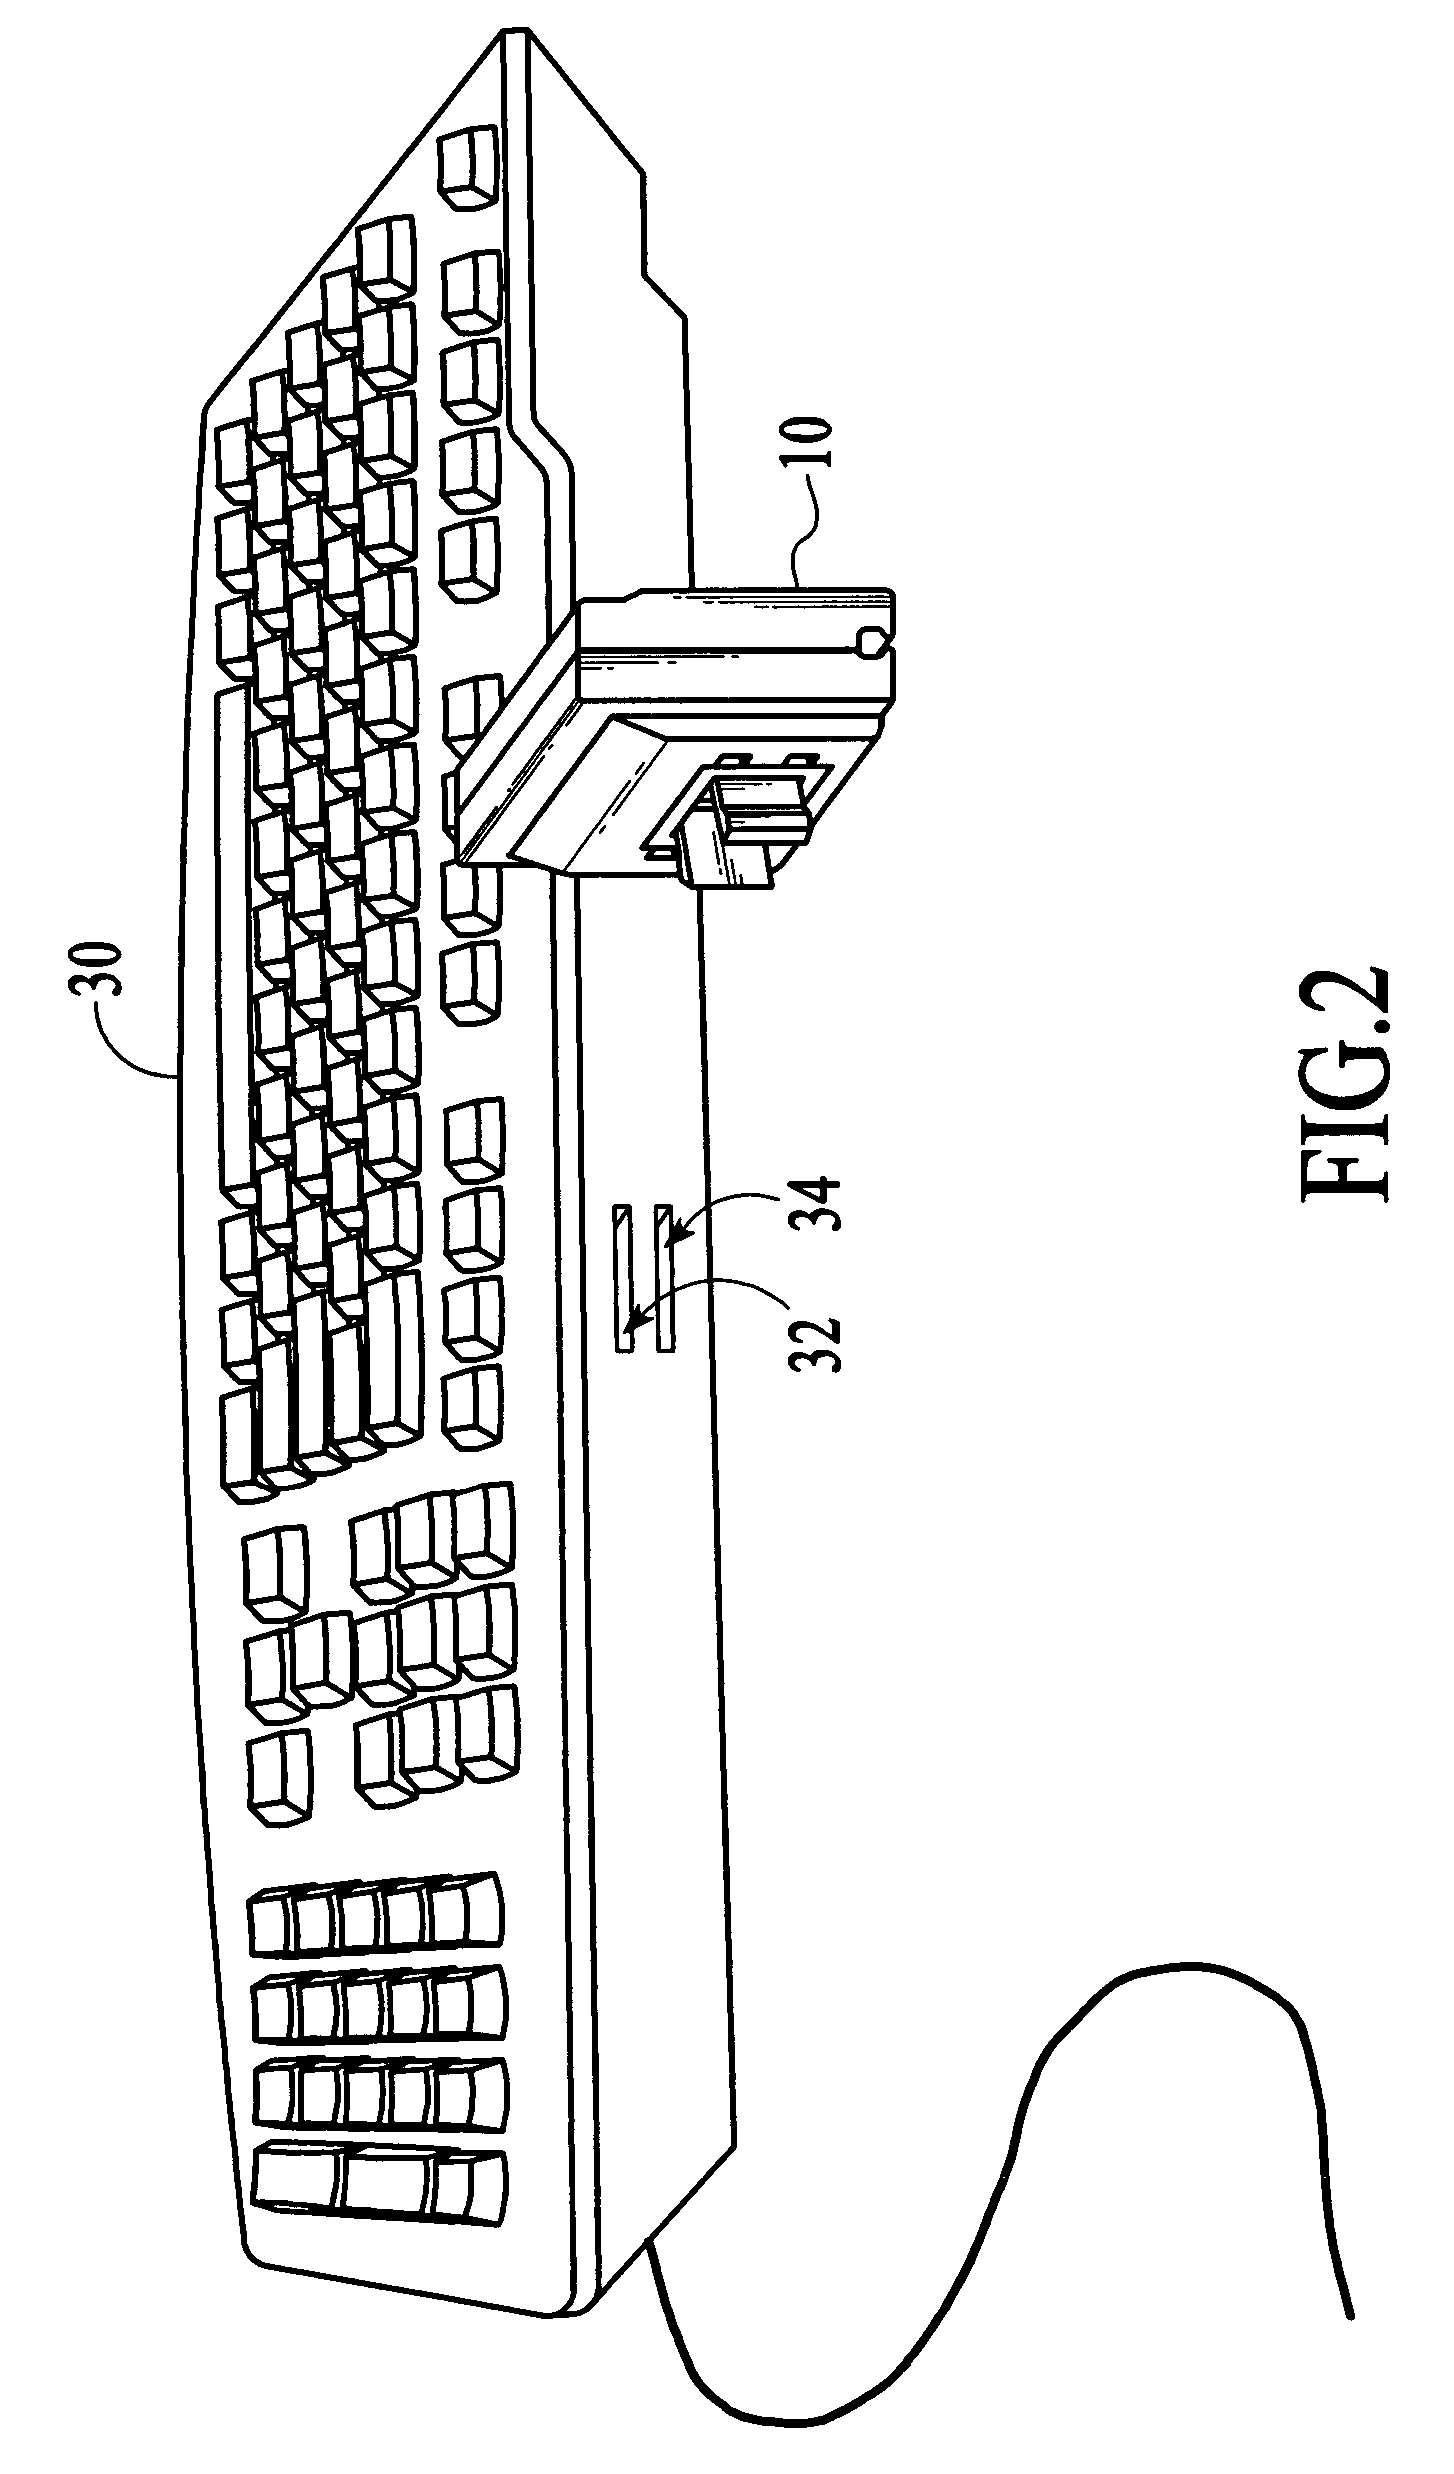 System for organizing one or more personal computer accessory devices